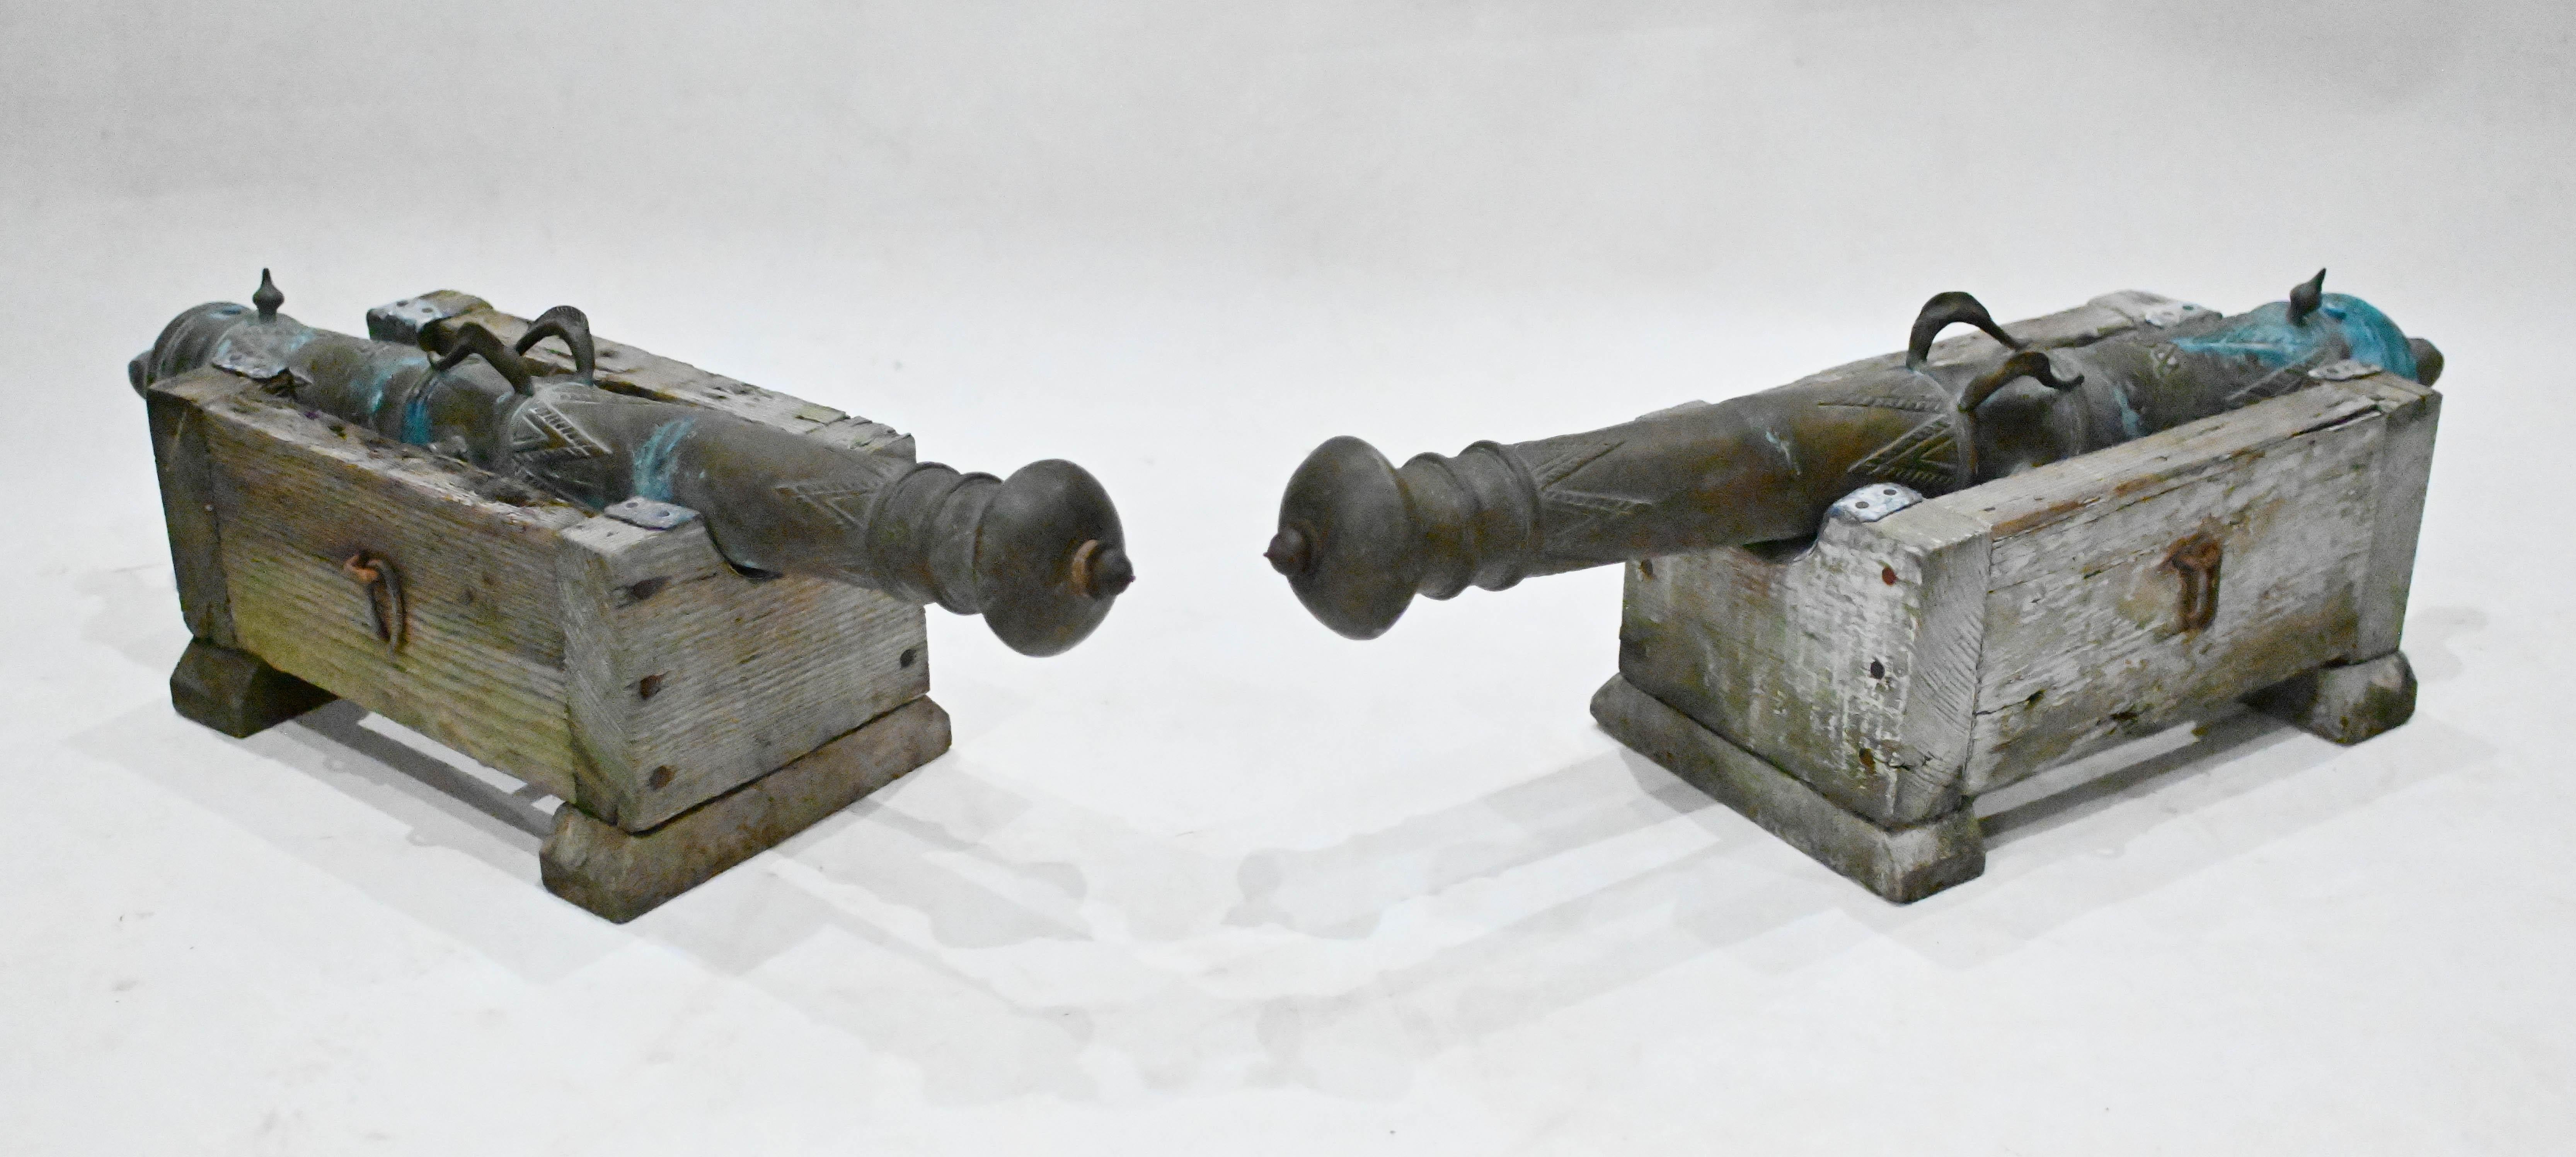 Gorgeous pair of antique cannons with bronze barrels
Great interiors pair would look great either side of a door We date this pair to circva 1840
The cannons sit on the wooden bases with antiqued finish to wood Offered in great condition ready for